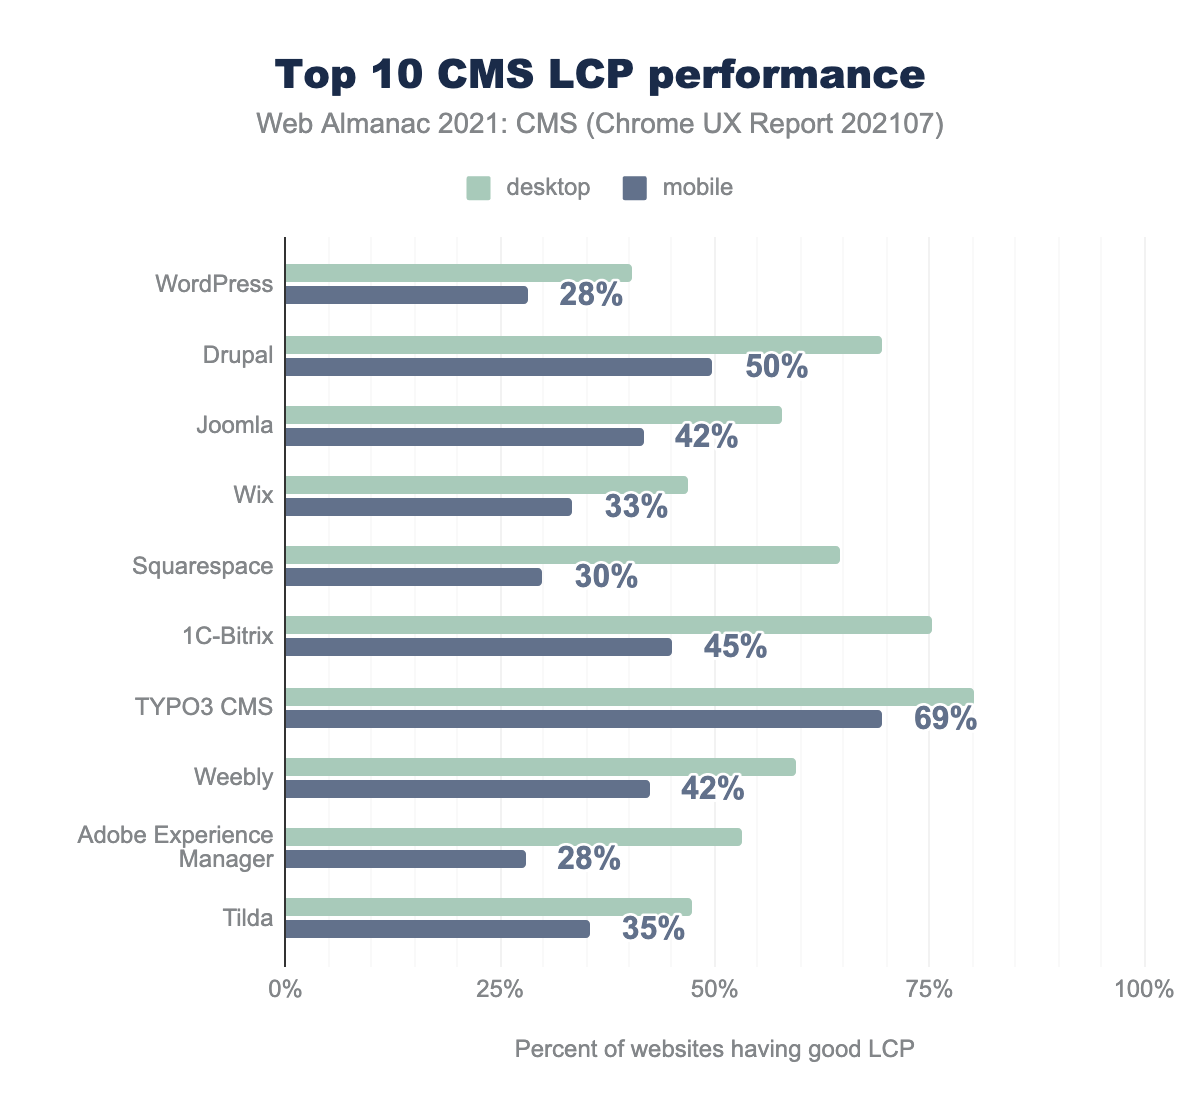 Top 10 CMSs LCP performance.